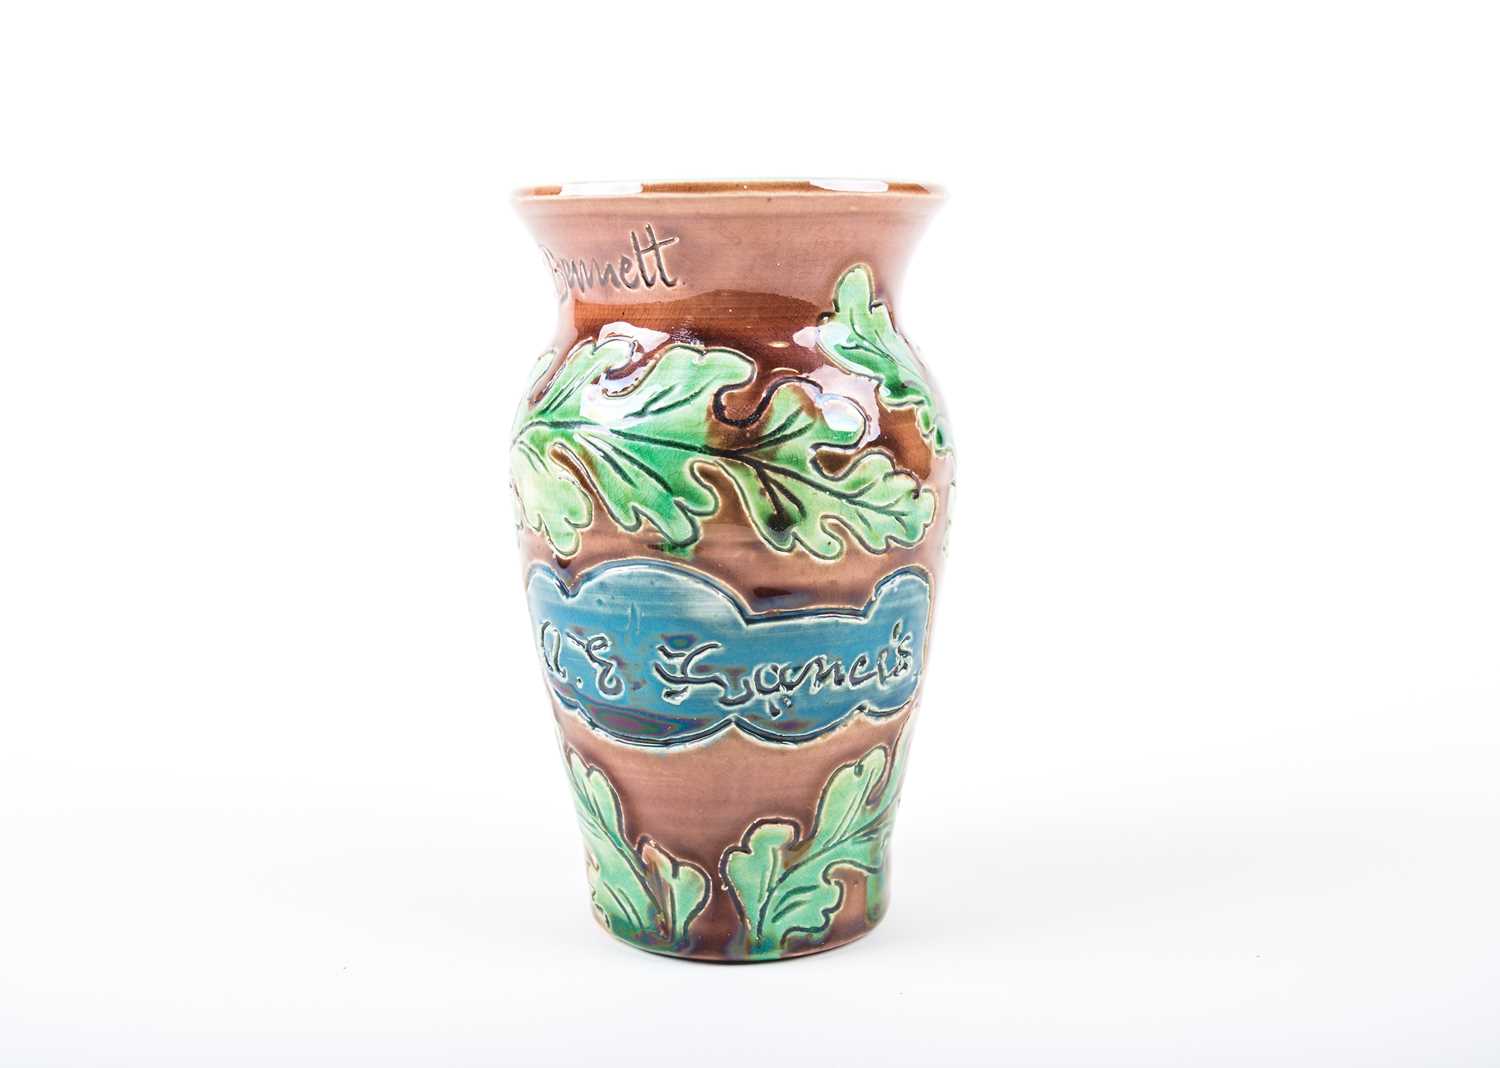 A 1920s small ceramic vase, produced as a commemorative piece at the Sibley Pottery by Rachel